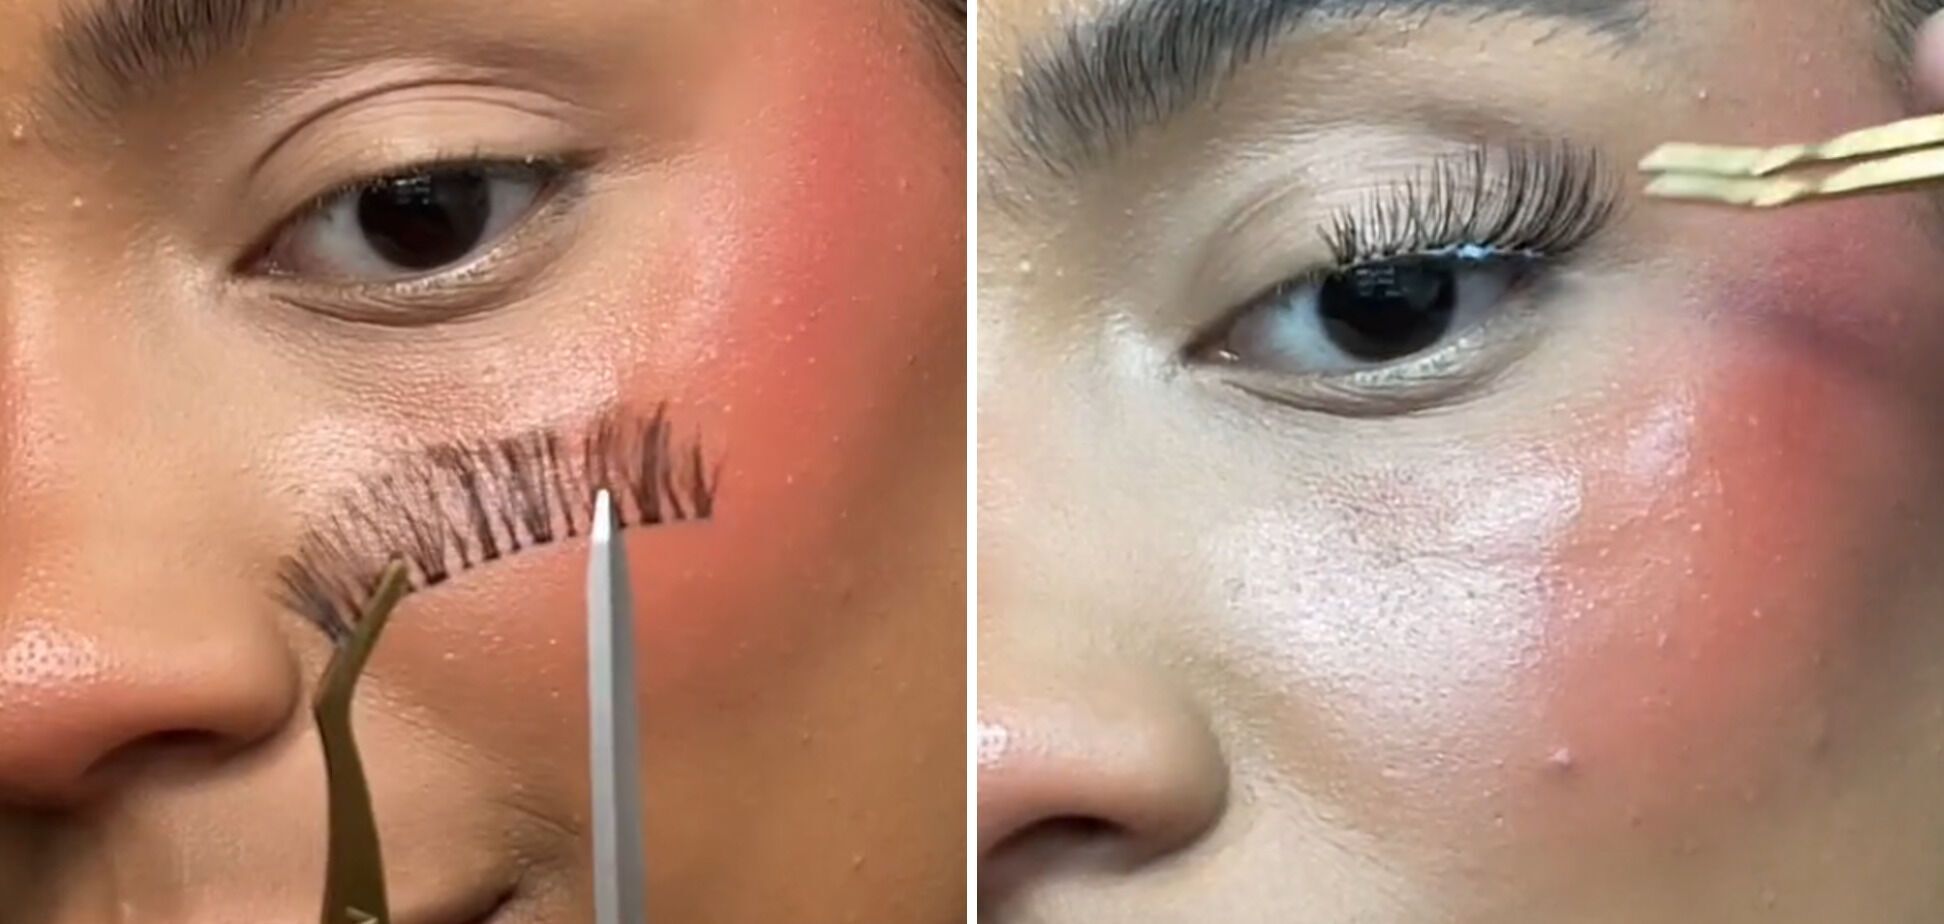 How to make a ''light'' look with false eyelashes: a life hack